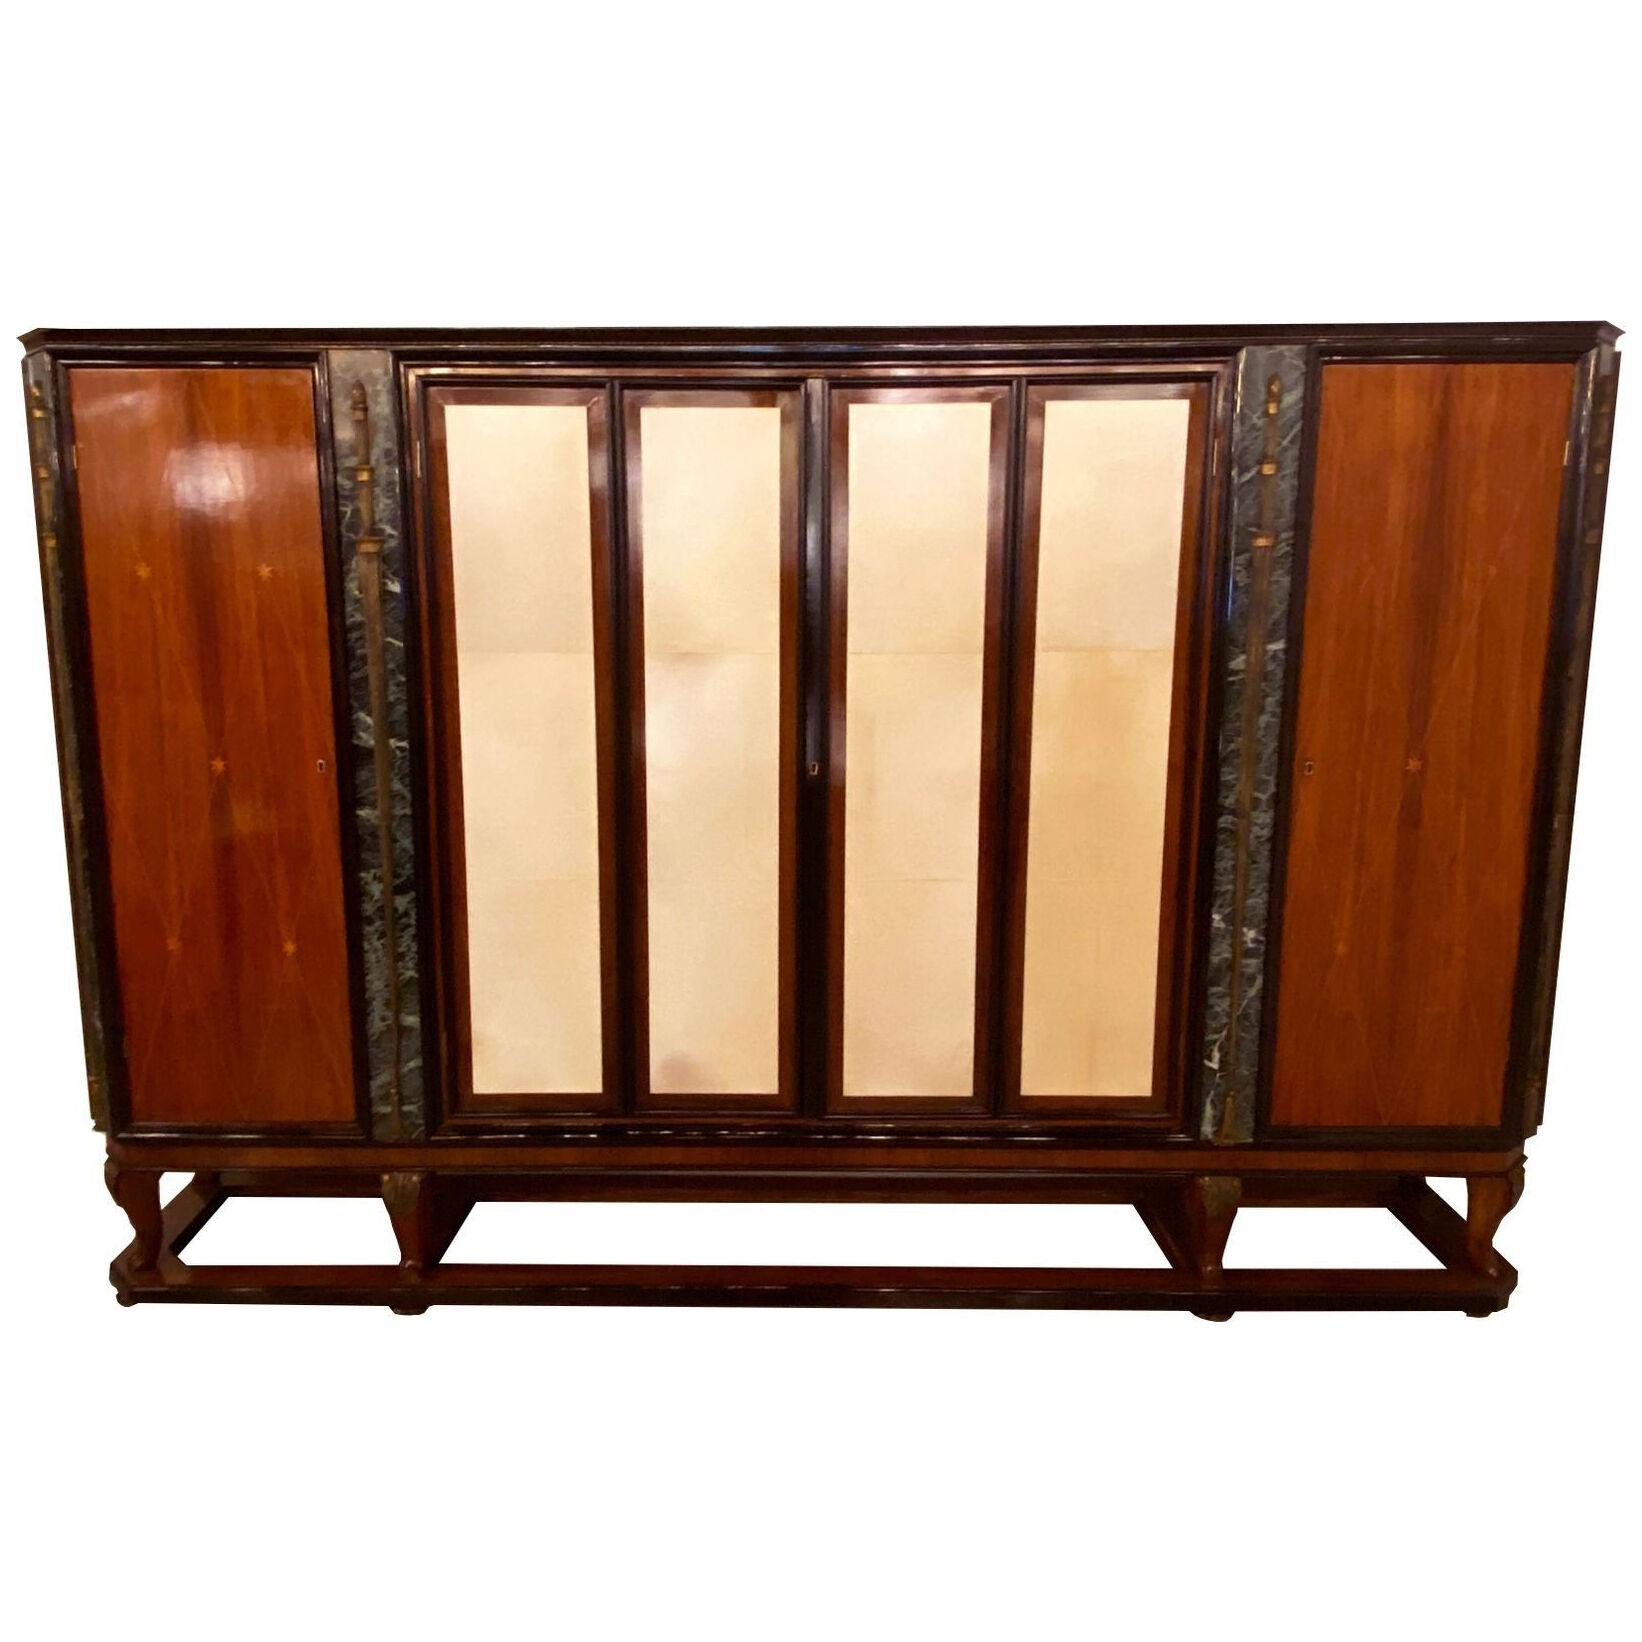 Italian Modern Palisander and Marble Bookcase, Attributed to Paolo Buffa